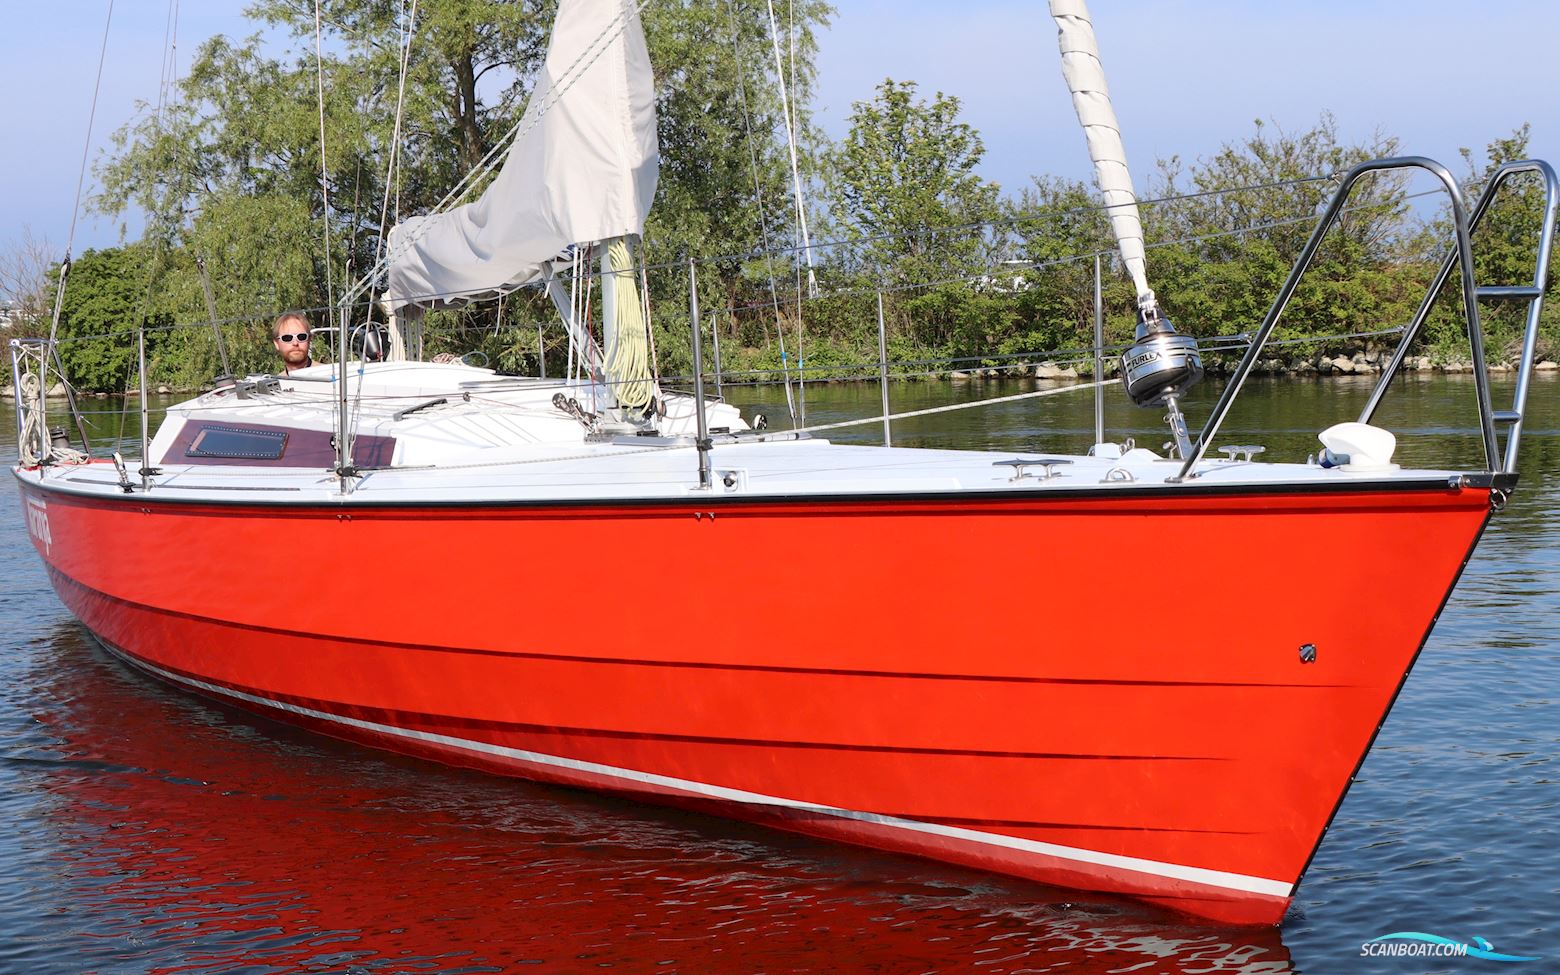 Waarschip 1010 Sailing boat 1984, with Volvo engine, The Netherlands